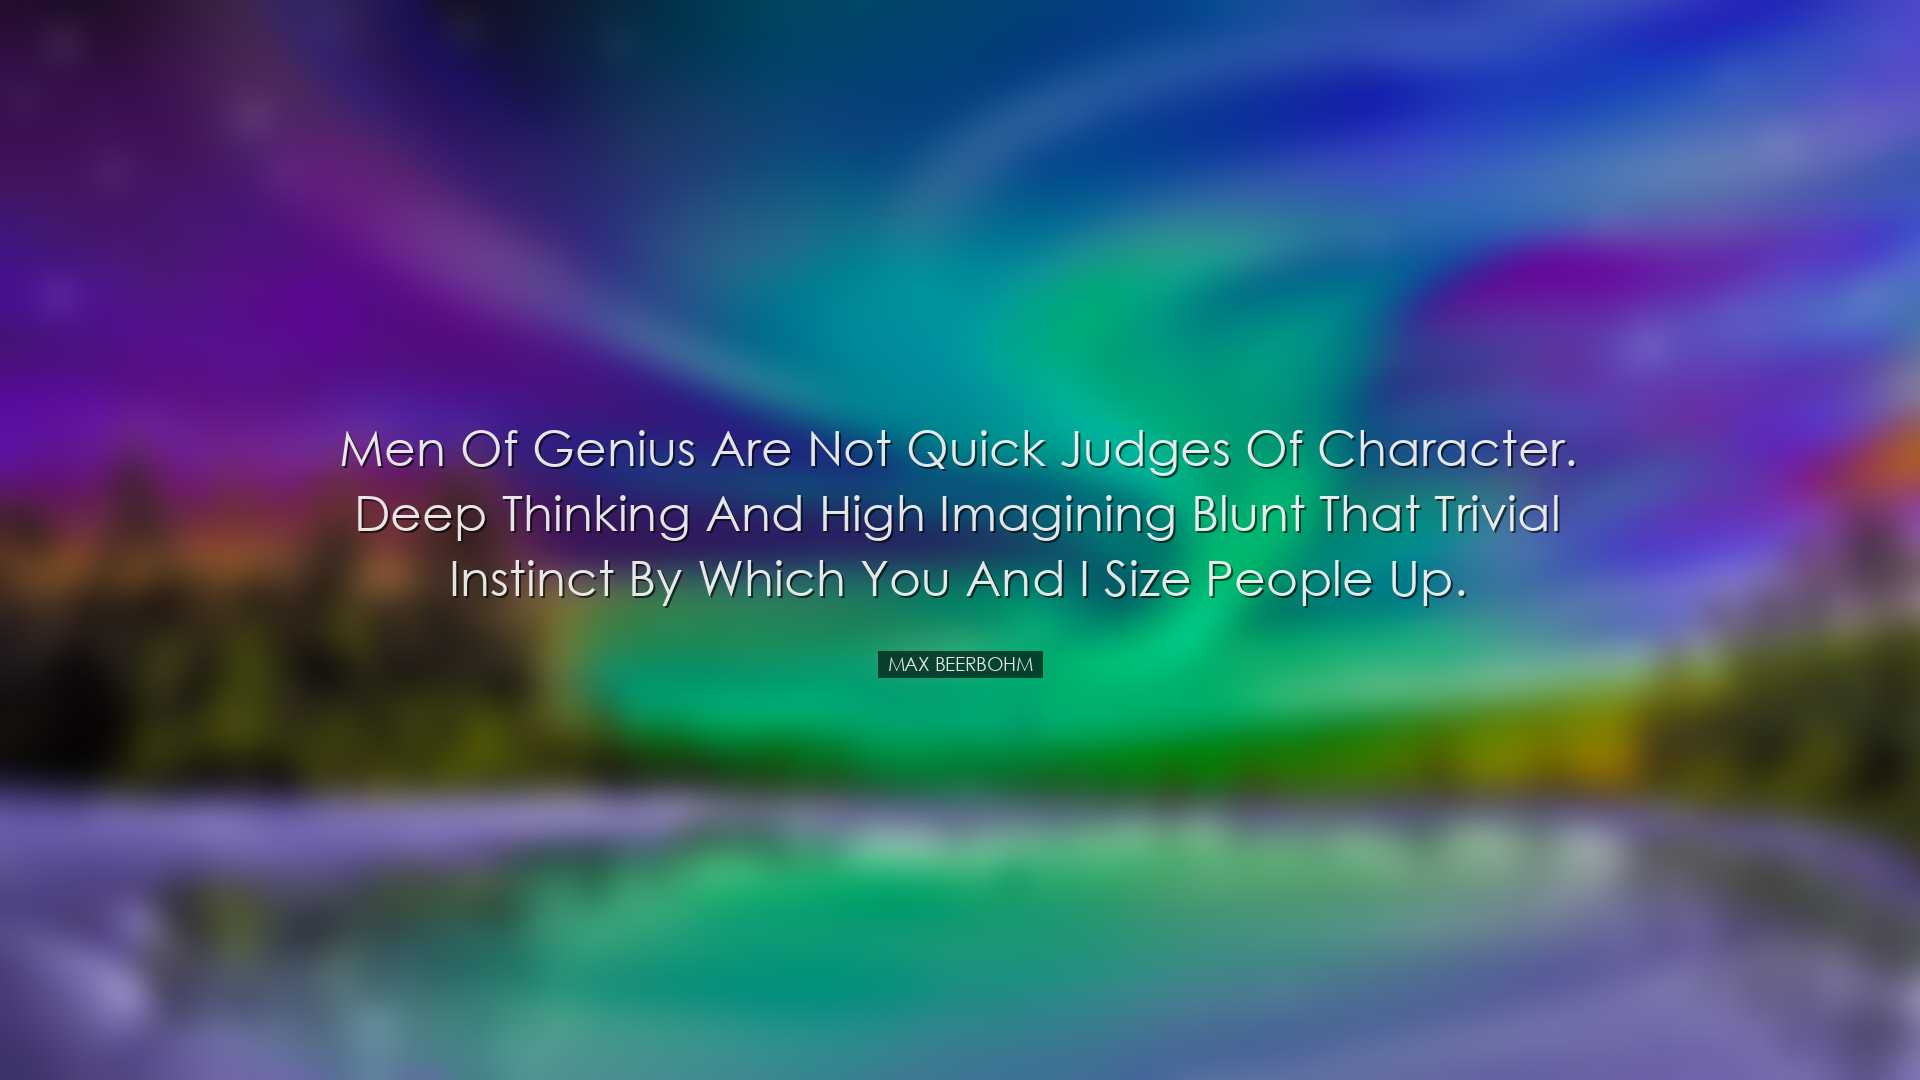 Men of genius are not quick judges of character. Deep thinking and